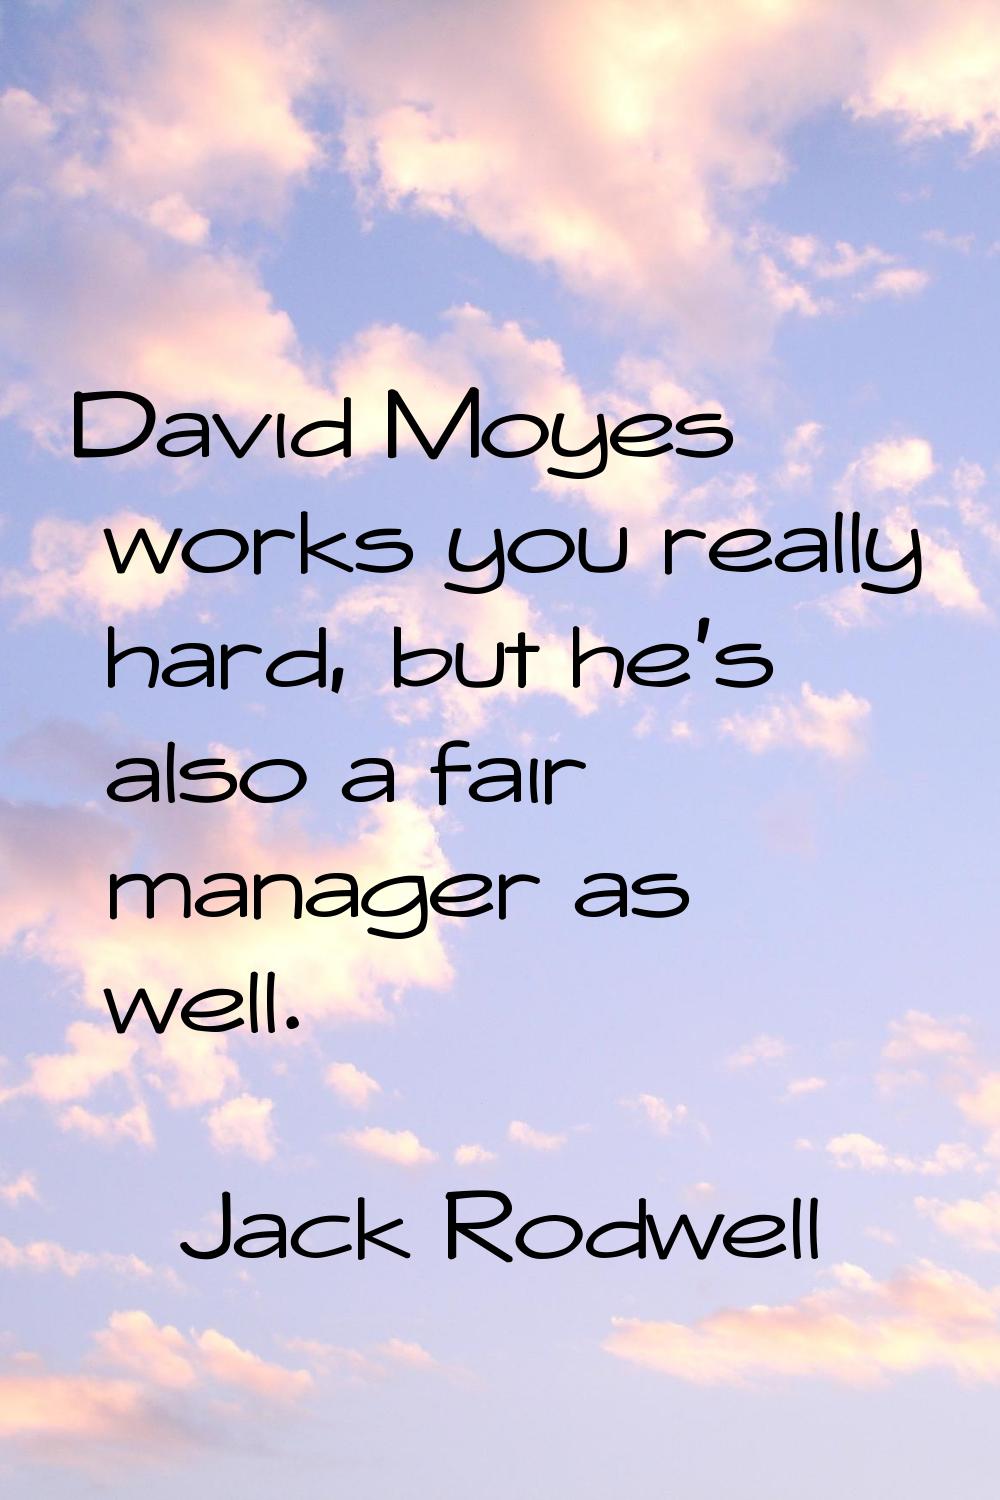 David Moyes works you really hard, but he's also a fair manager as well.